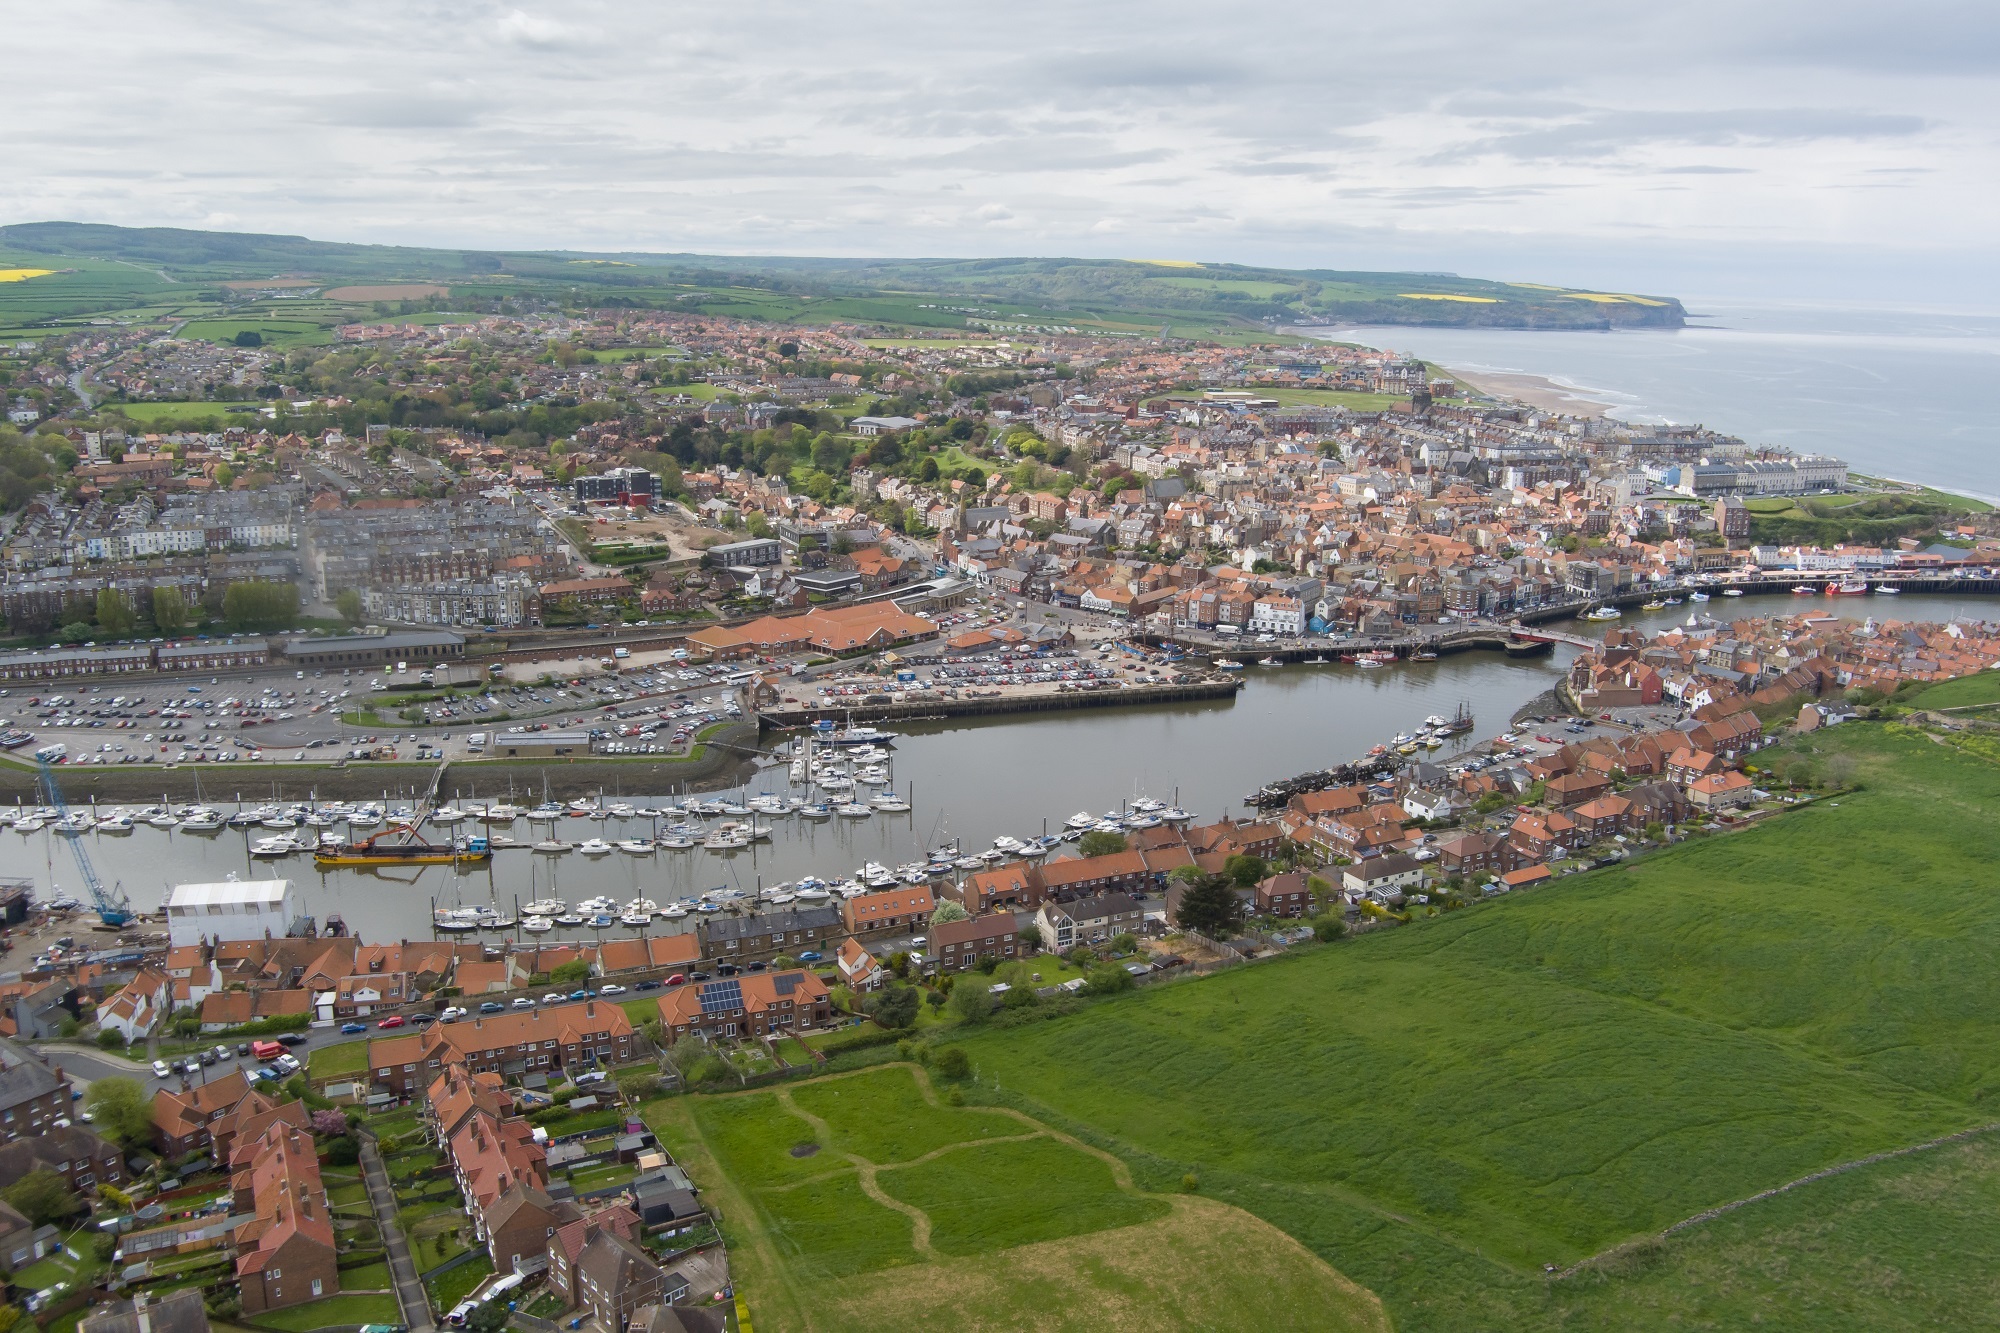 An aerial view of Whitby.